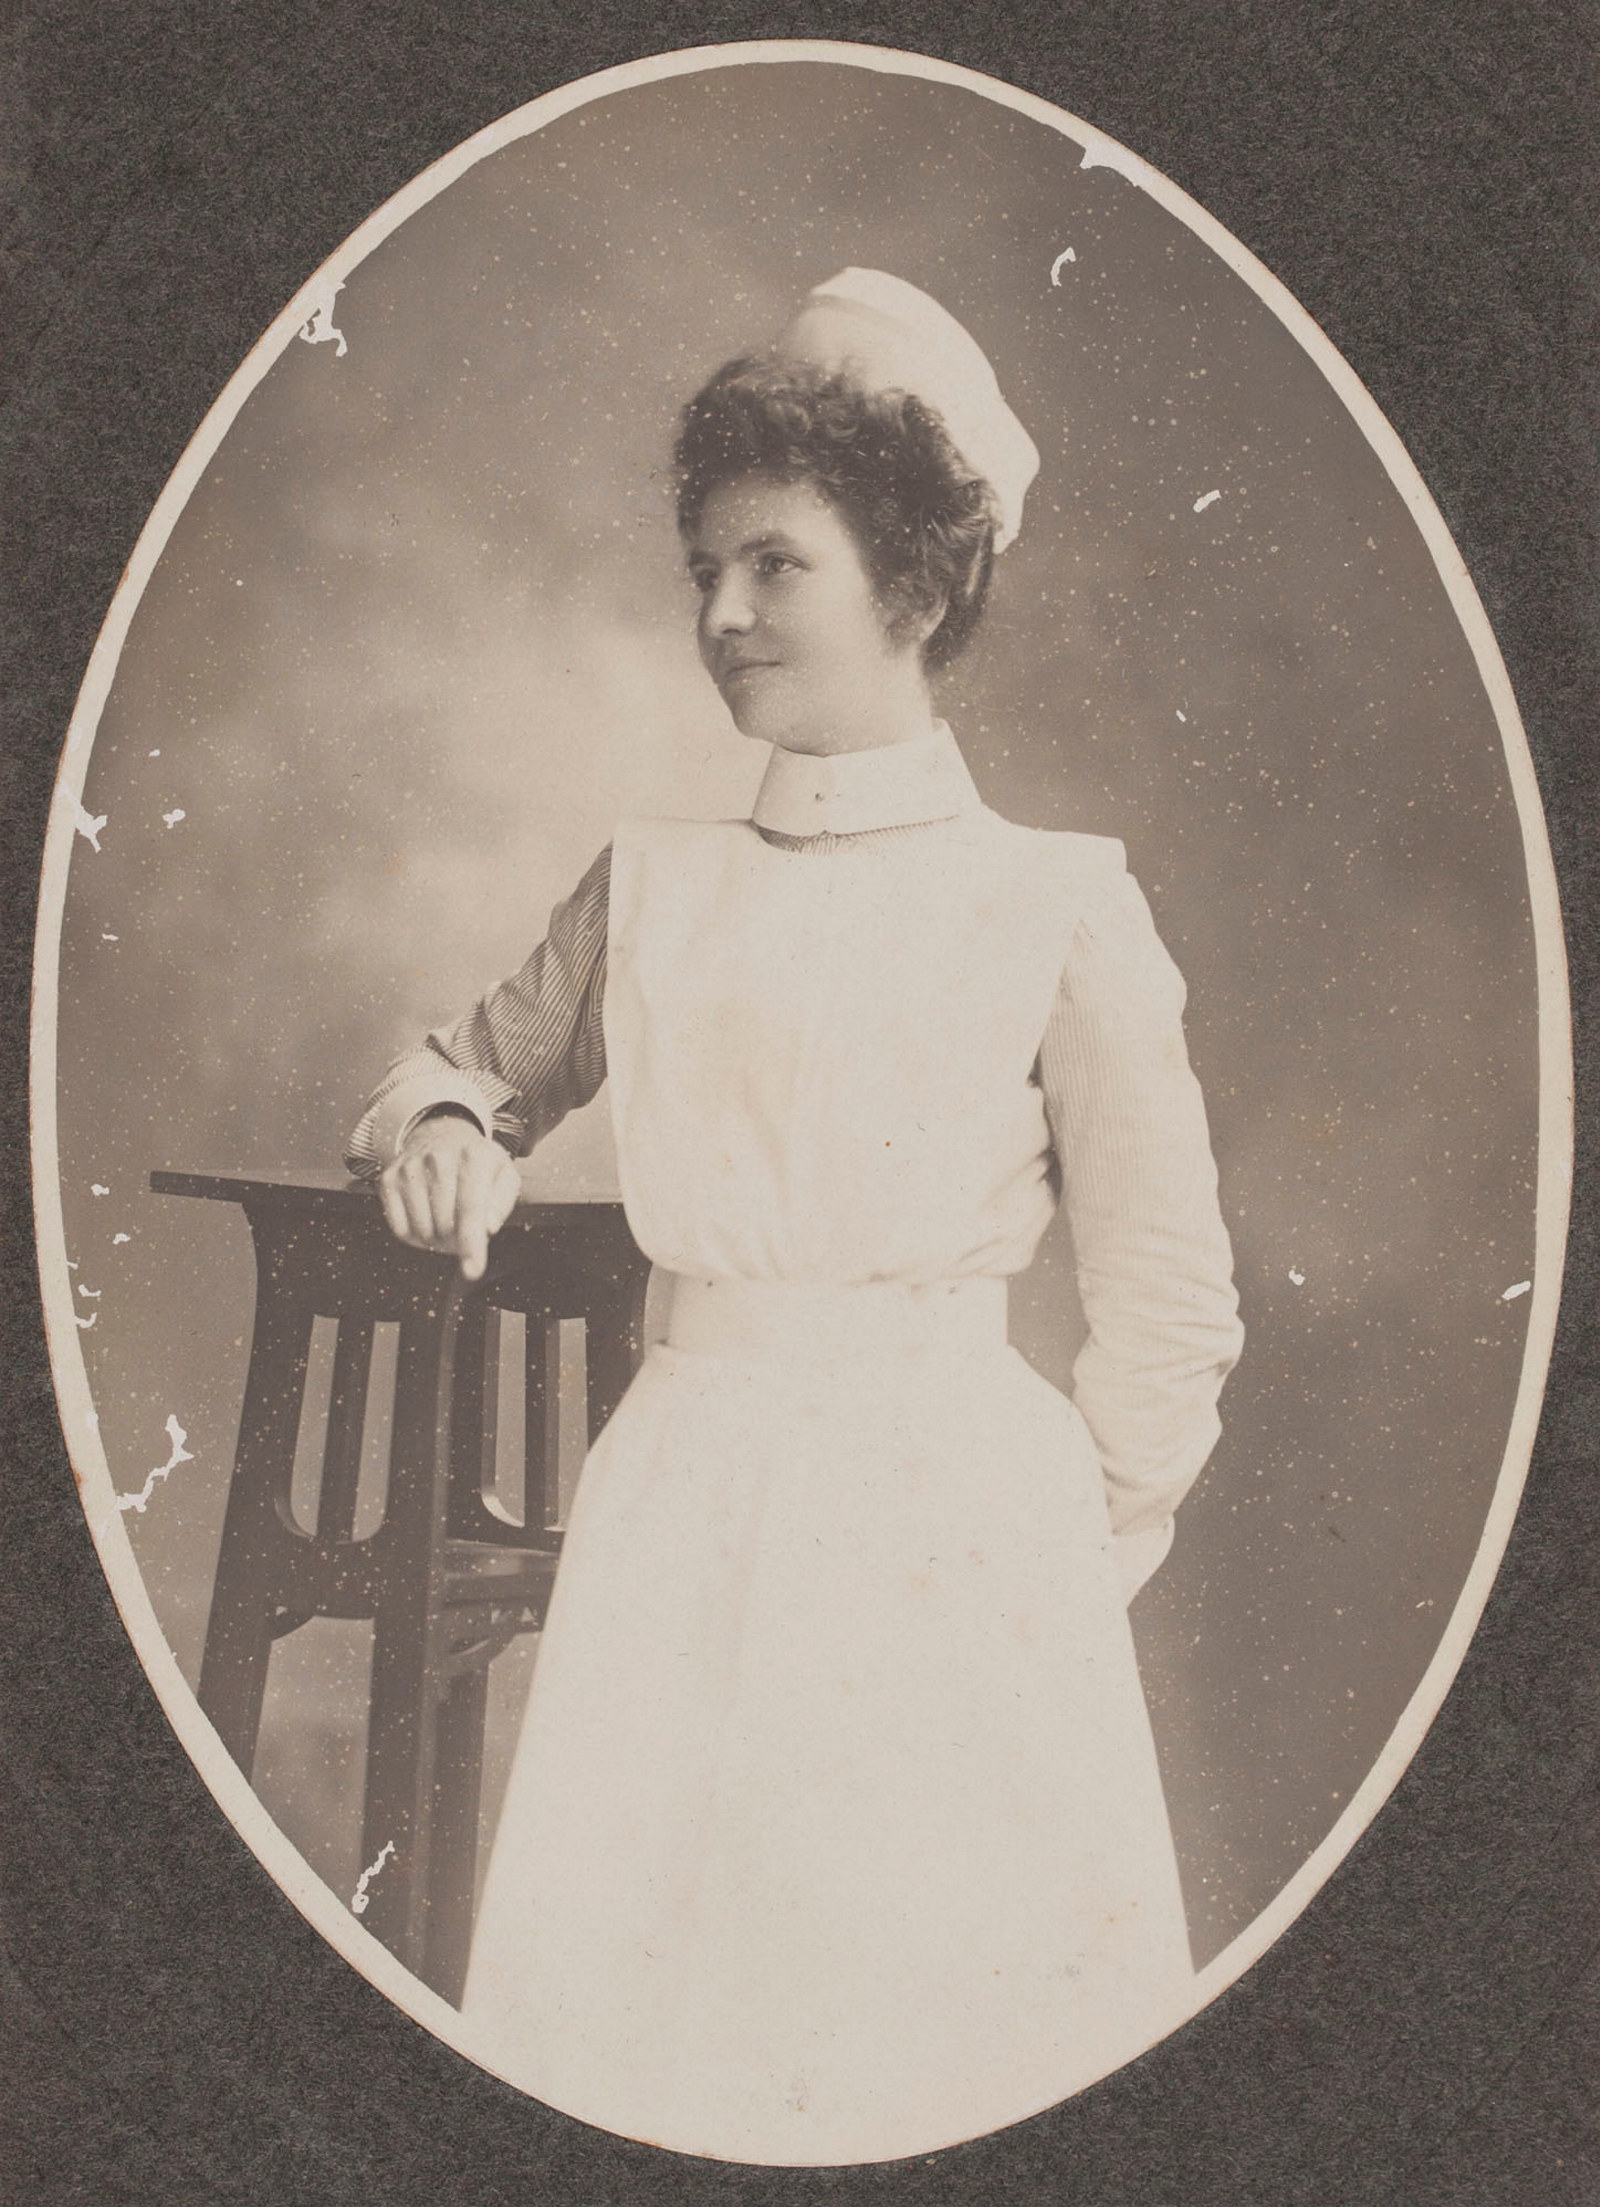 Cameo of woman in white uniform and cap.